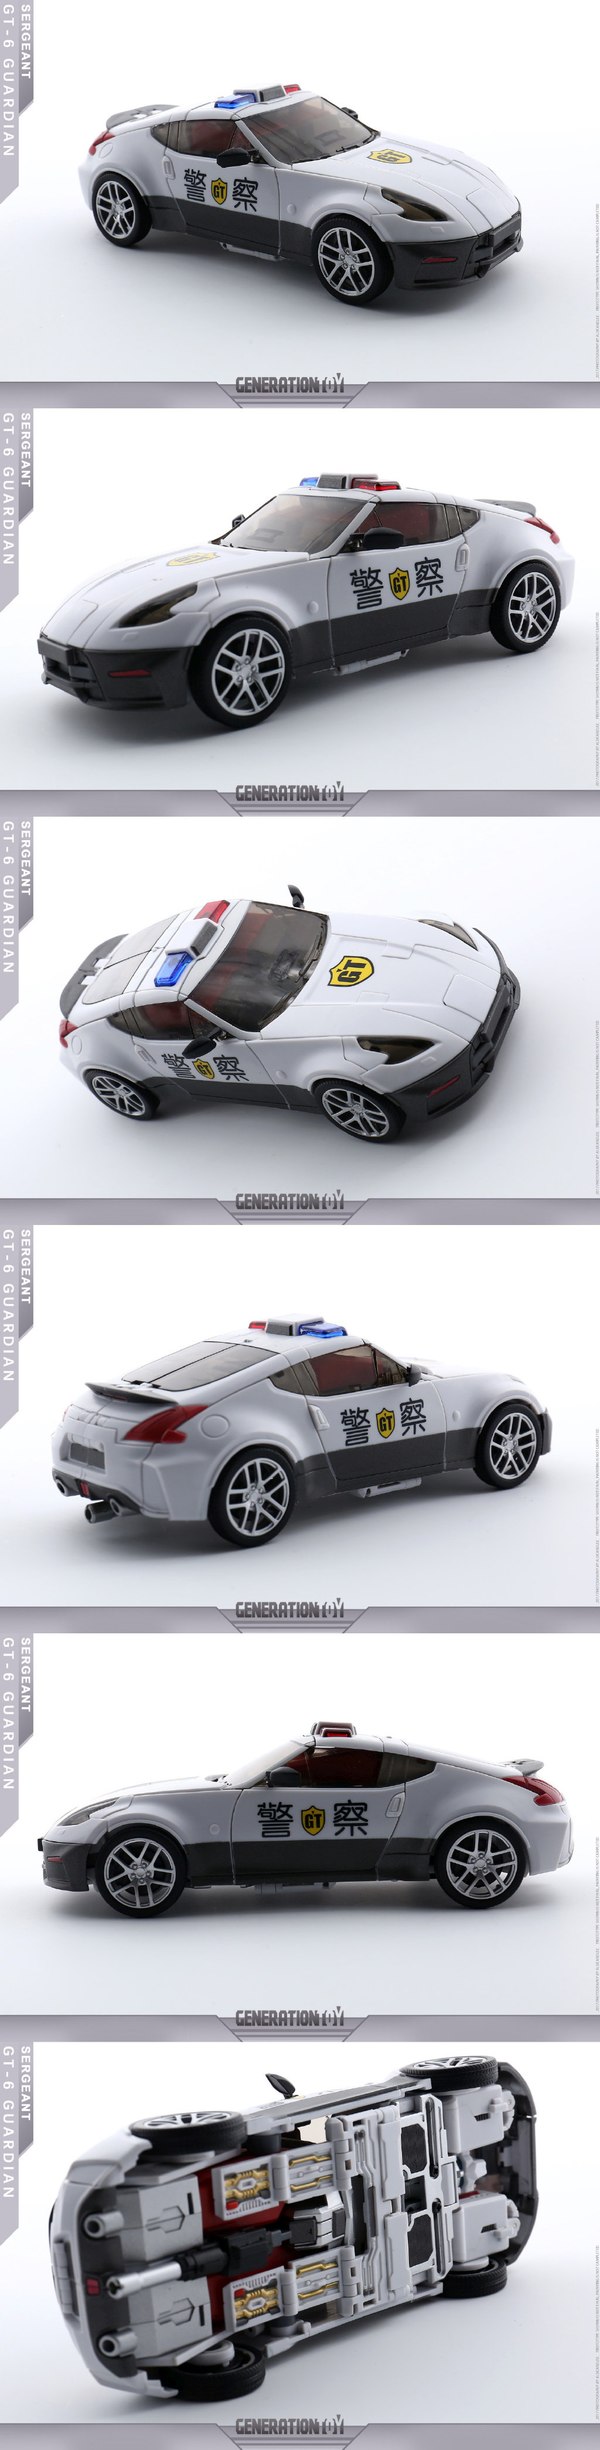 Generation Toy GT 6 Sergeant Not Streetwise From Unofficial MP Protectobots Team 09 (9 of 9)